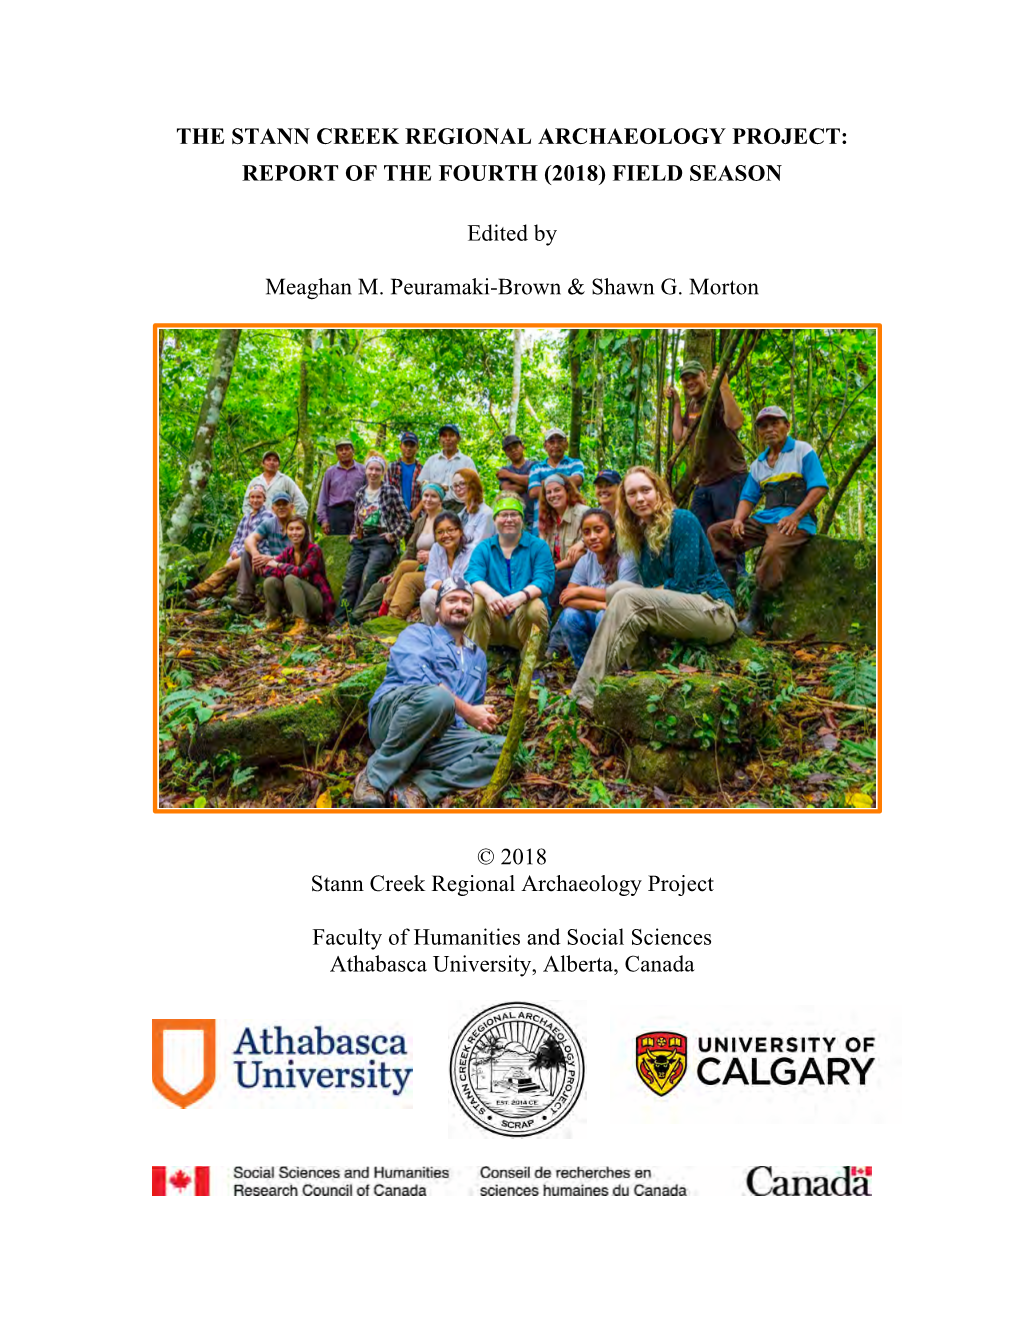 THE STANN CREEK REGIONAL ARCHAEOLOGY PROJECT: REPORT of the FOURTH (2018) FIELD SEASON Edited by Meaghan M. Peuramaki-Brown &A